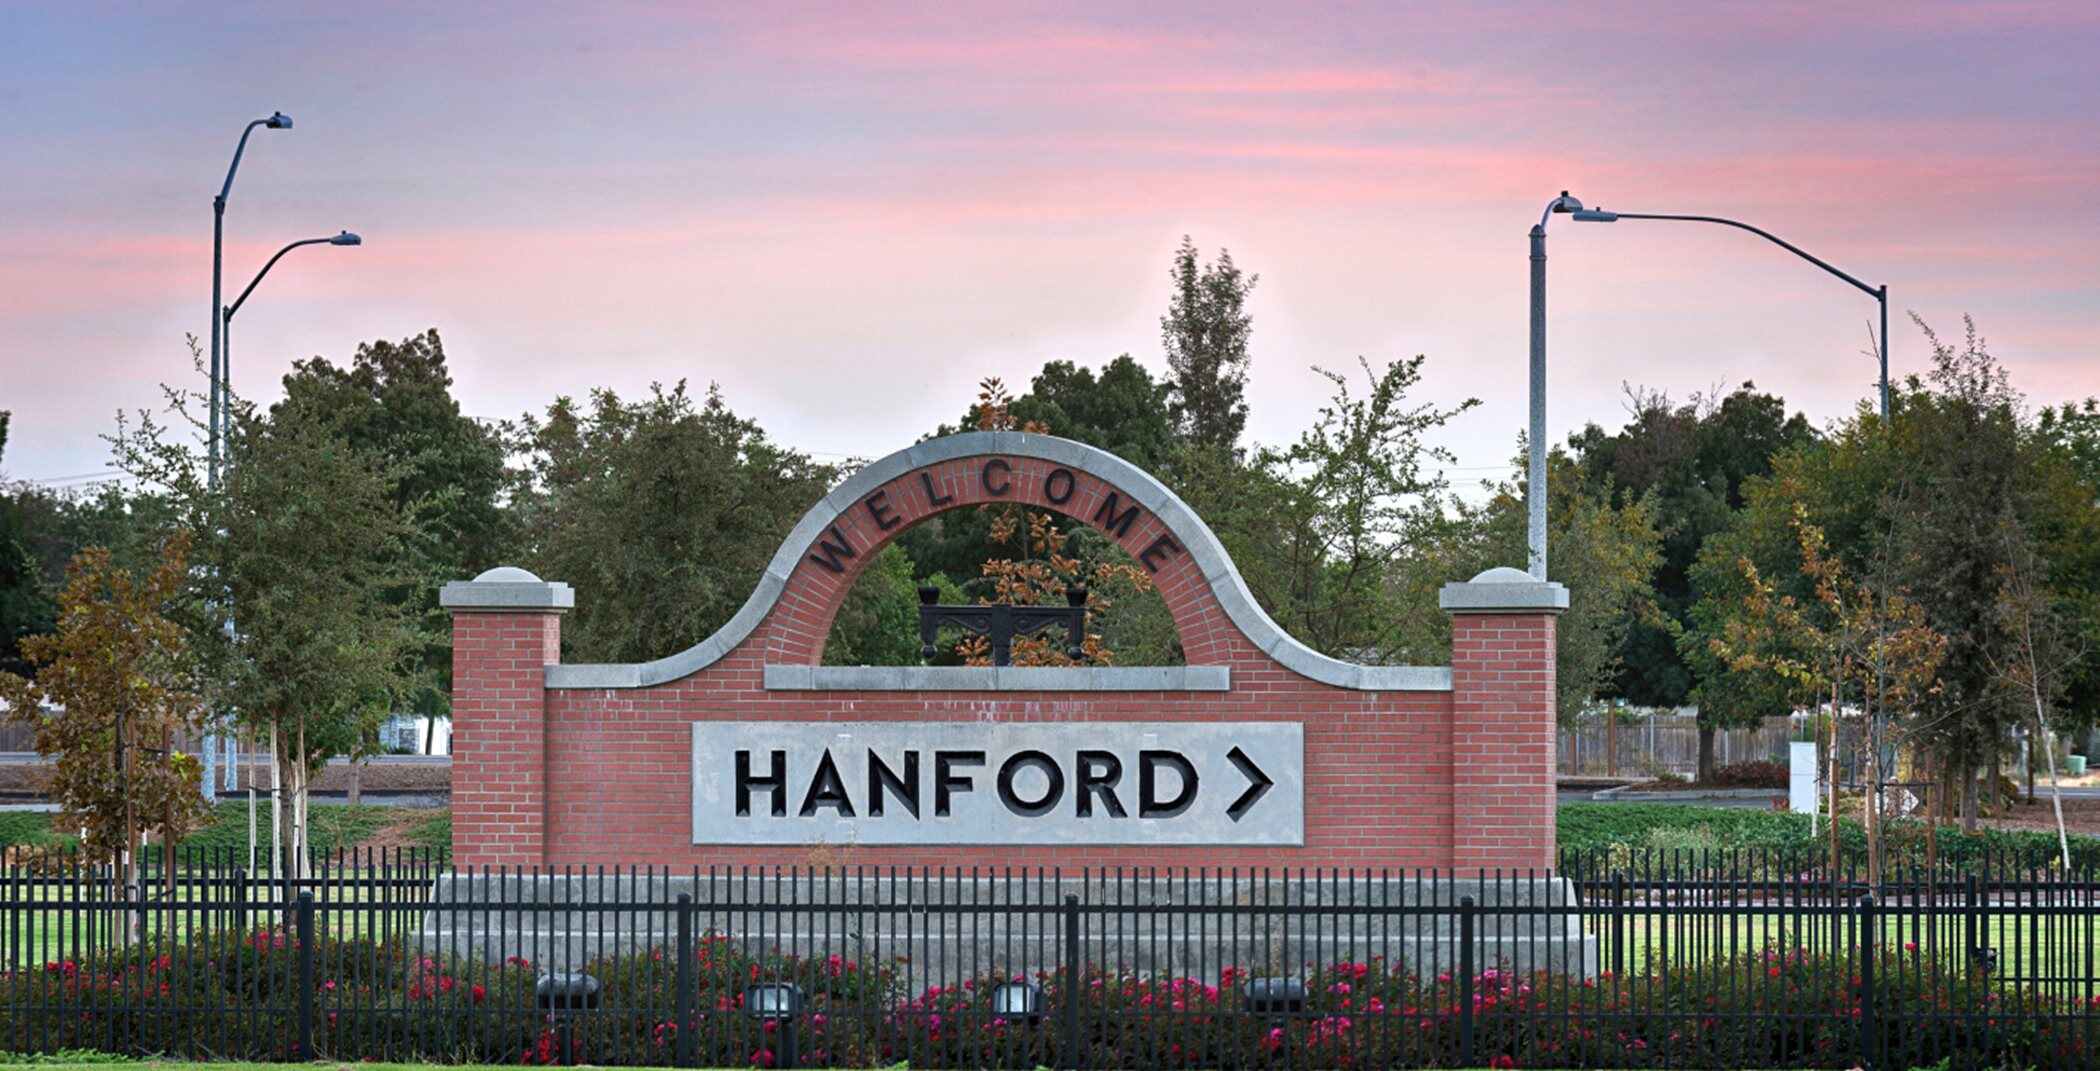 City of Hanford monument sign at dusk